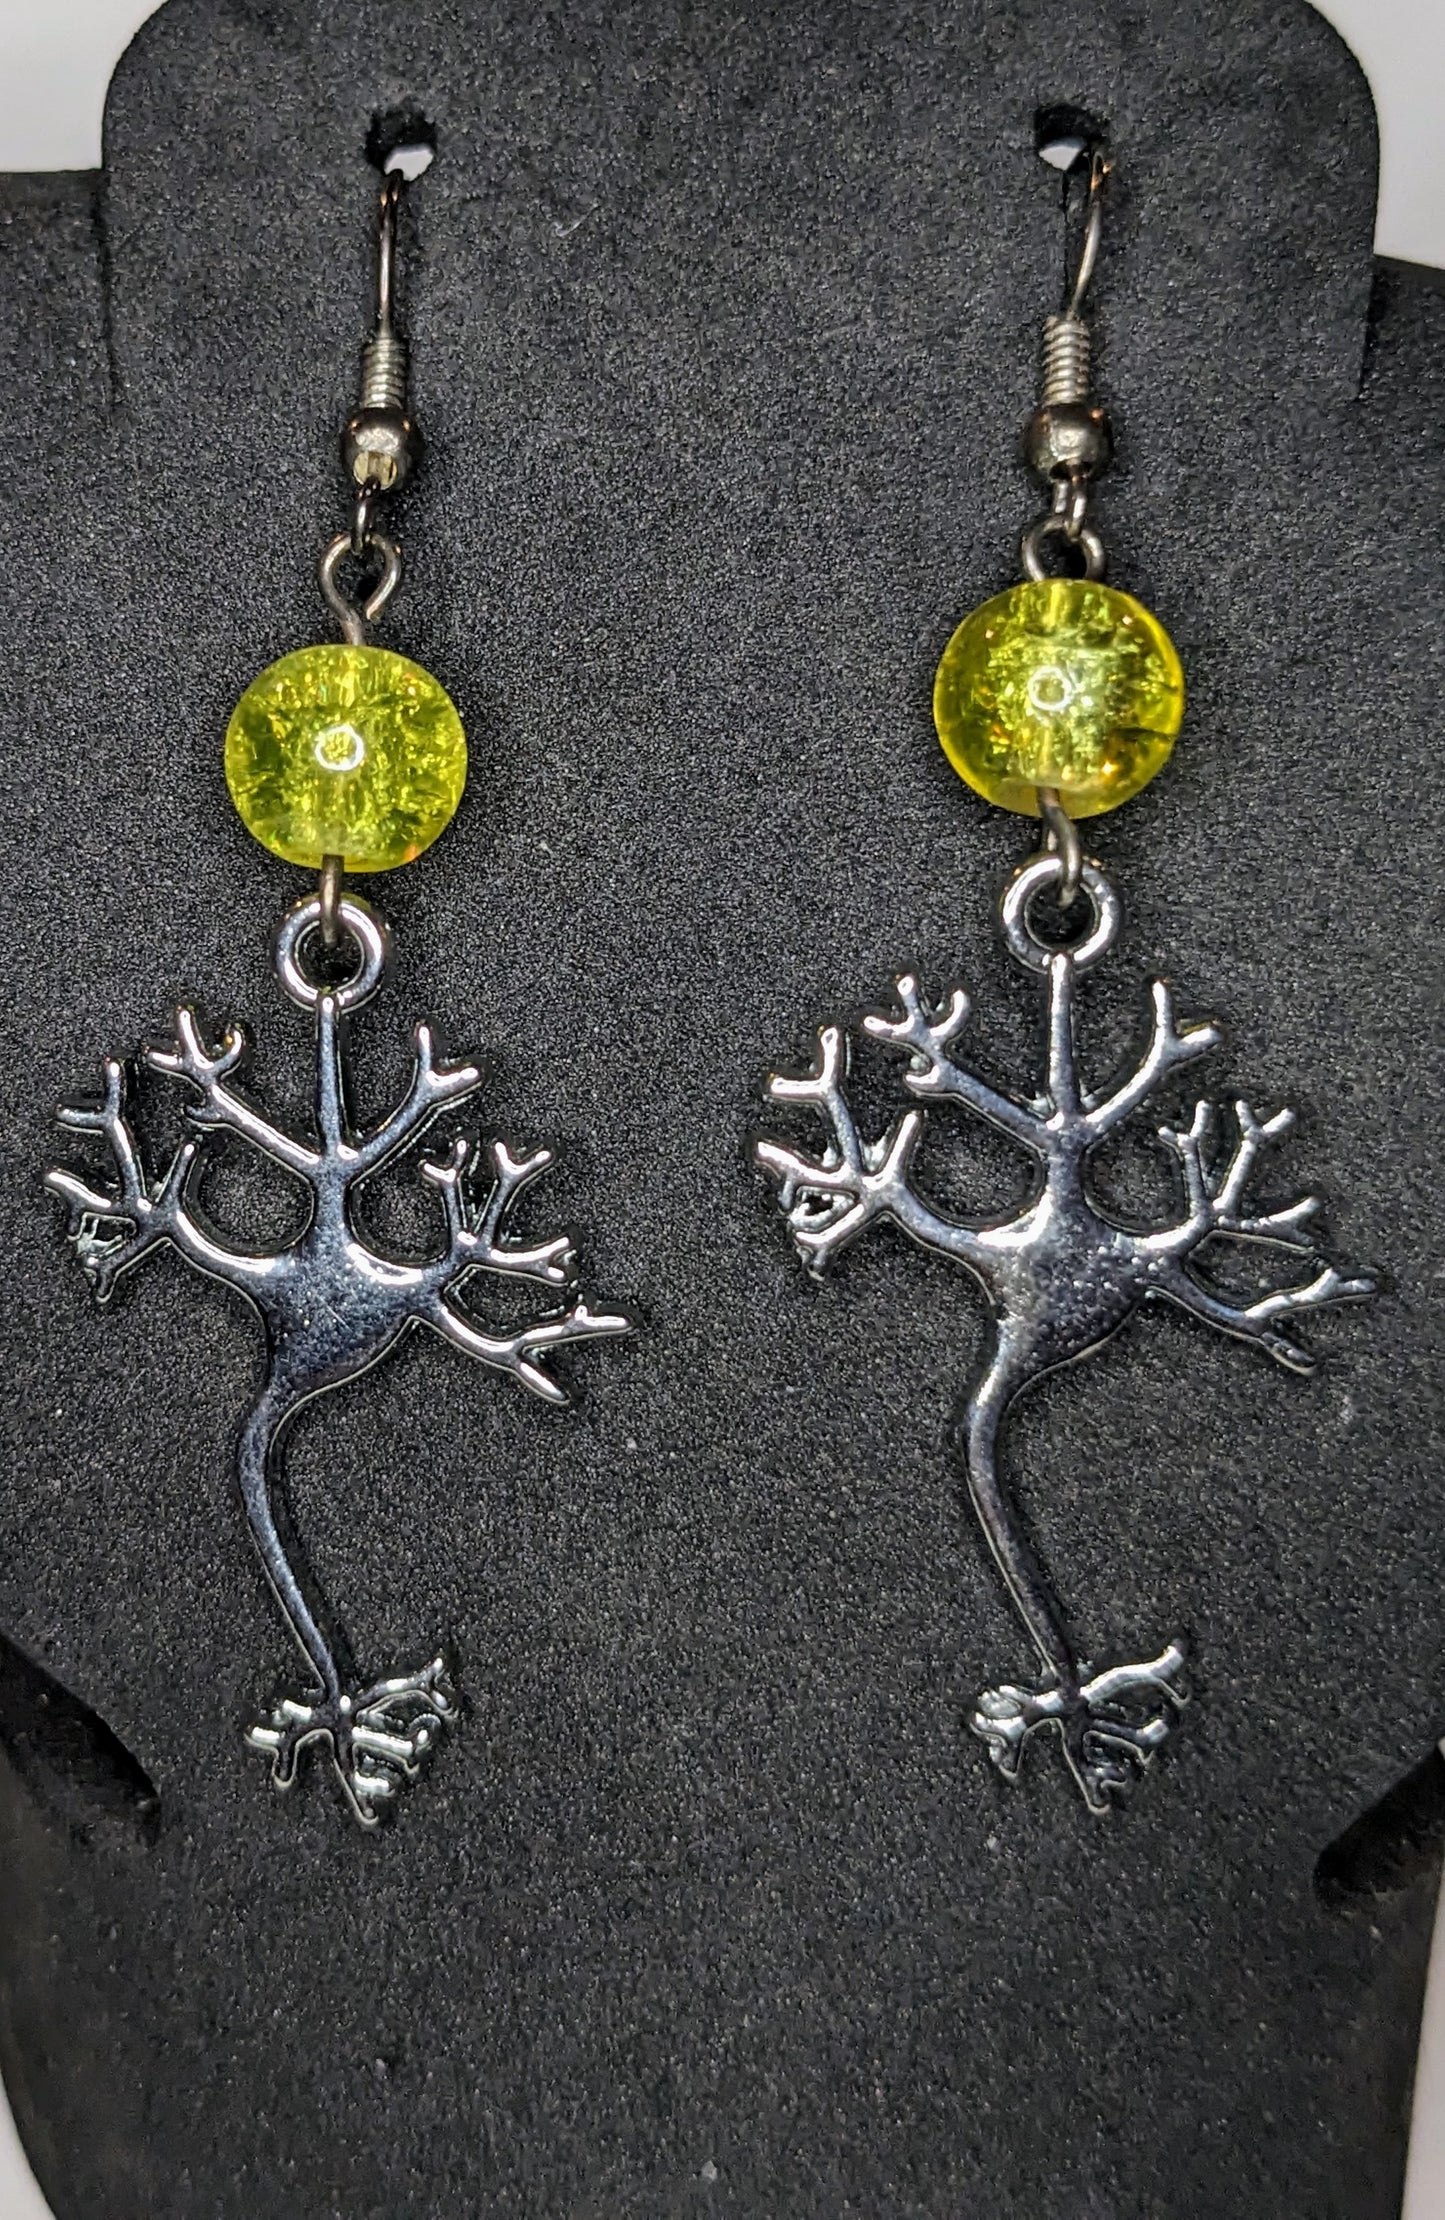 Earrings on a black display.  Earrings are silver neuron charms with a yellow glass crackle bead